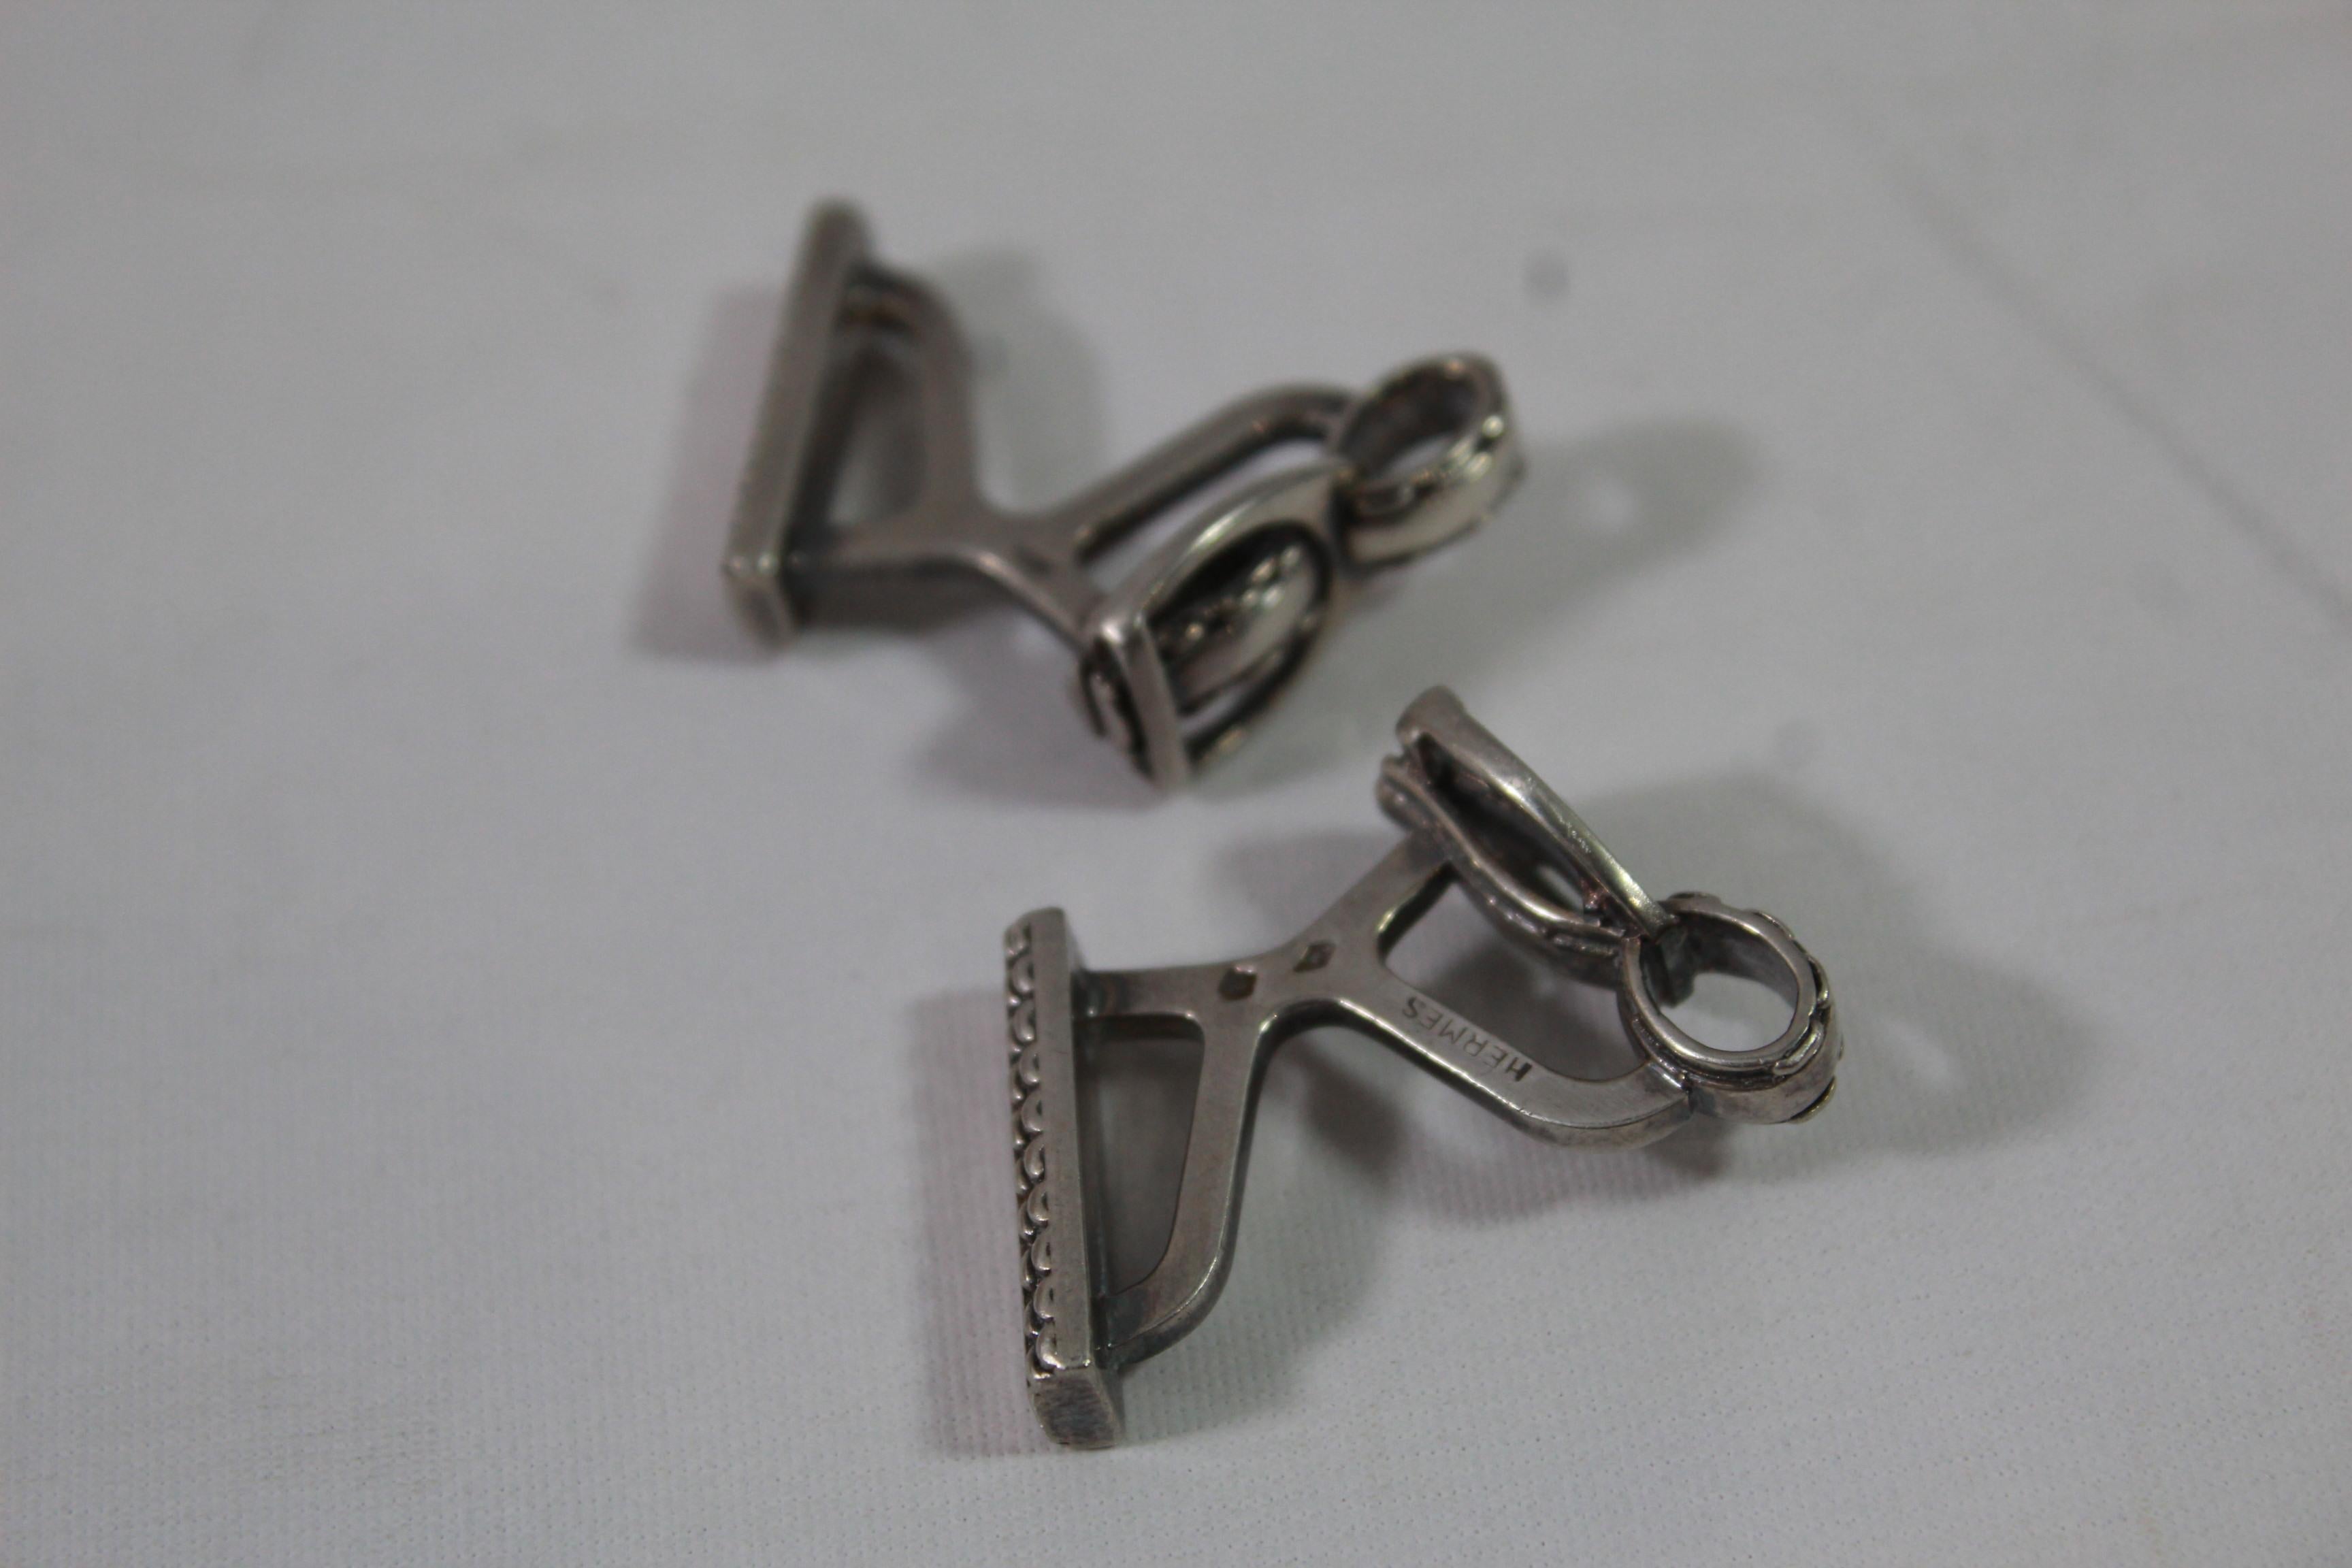 Vintage Hermes Silver Cufflinks

Good vintage condition

With box

Signed